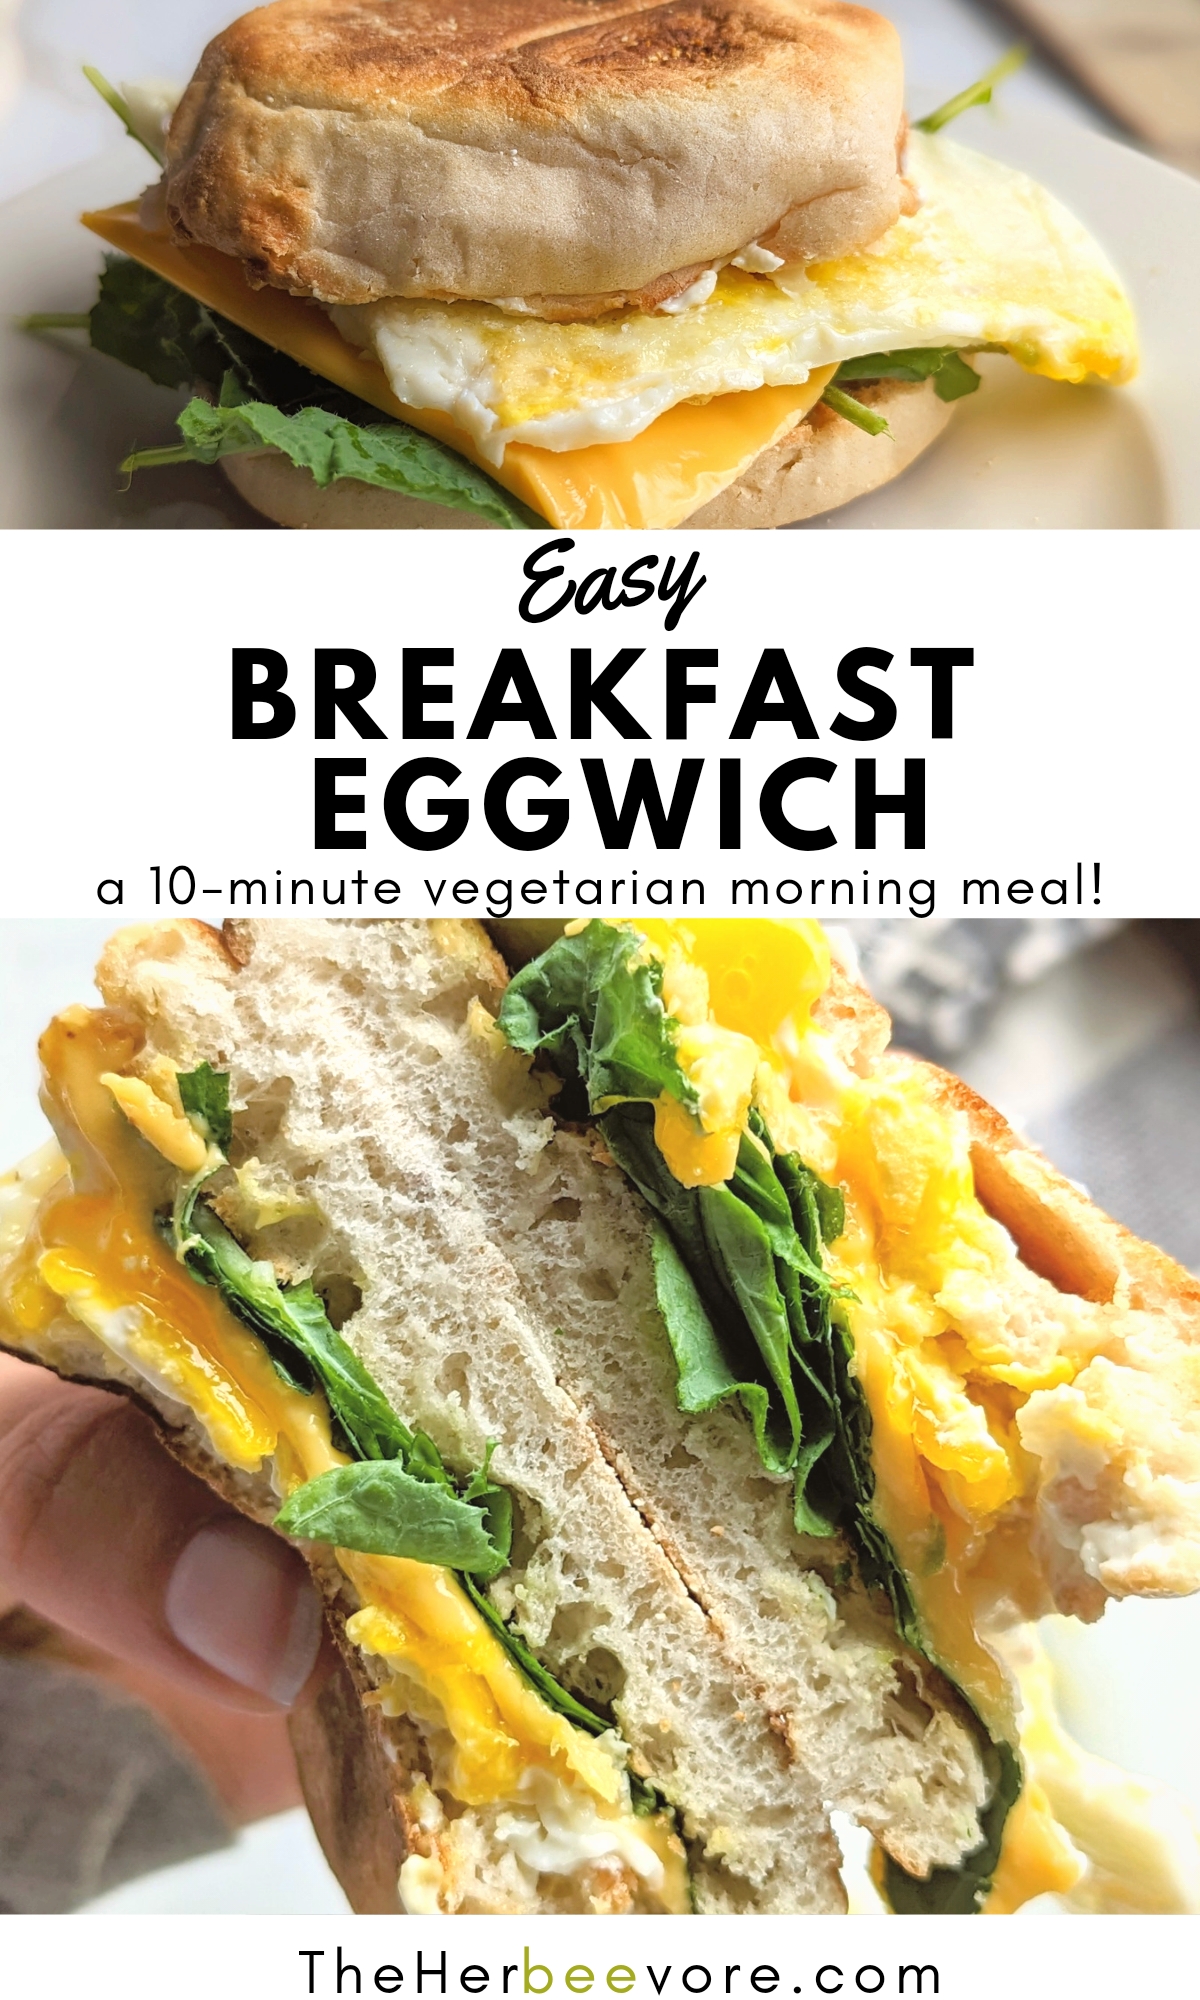 eggwich recipe vegetarian egg muffin breakfast sandwich healthy meatless breakfast ideas with eggs and cream cheese